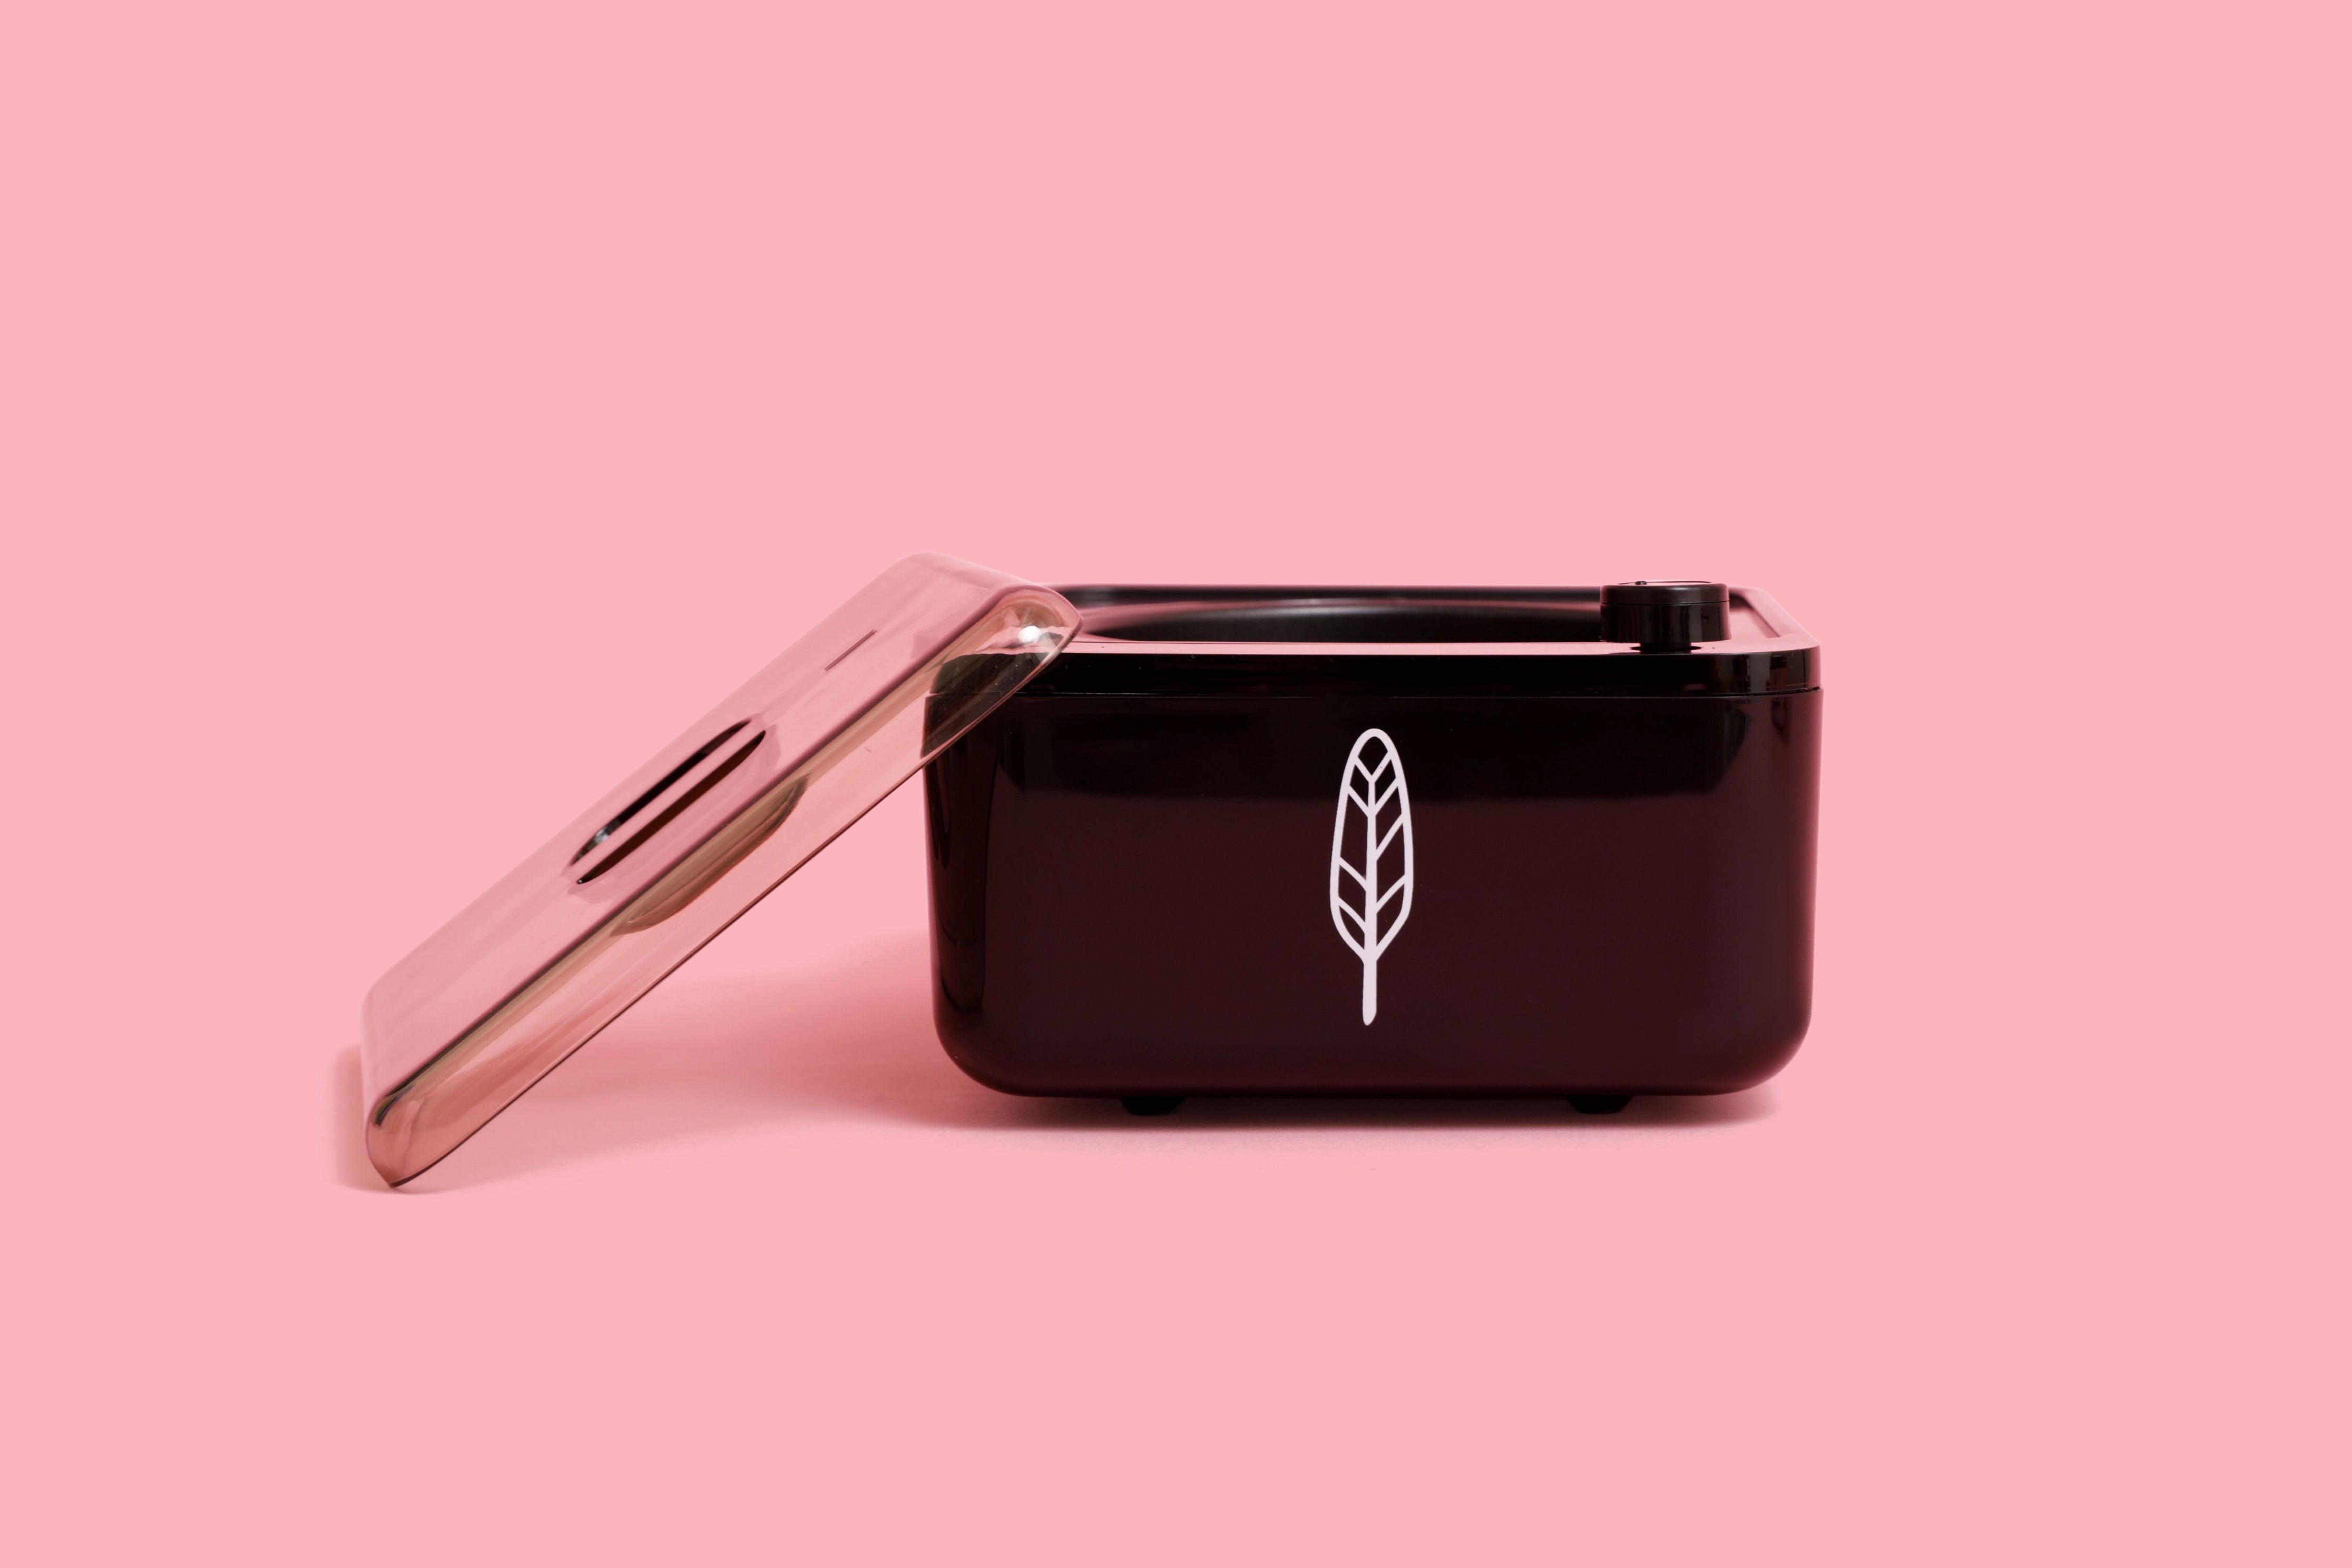 Get Wholesale pink wax pot For Professional Aestheticians' Use